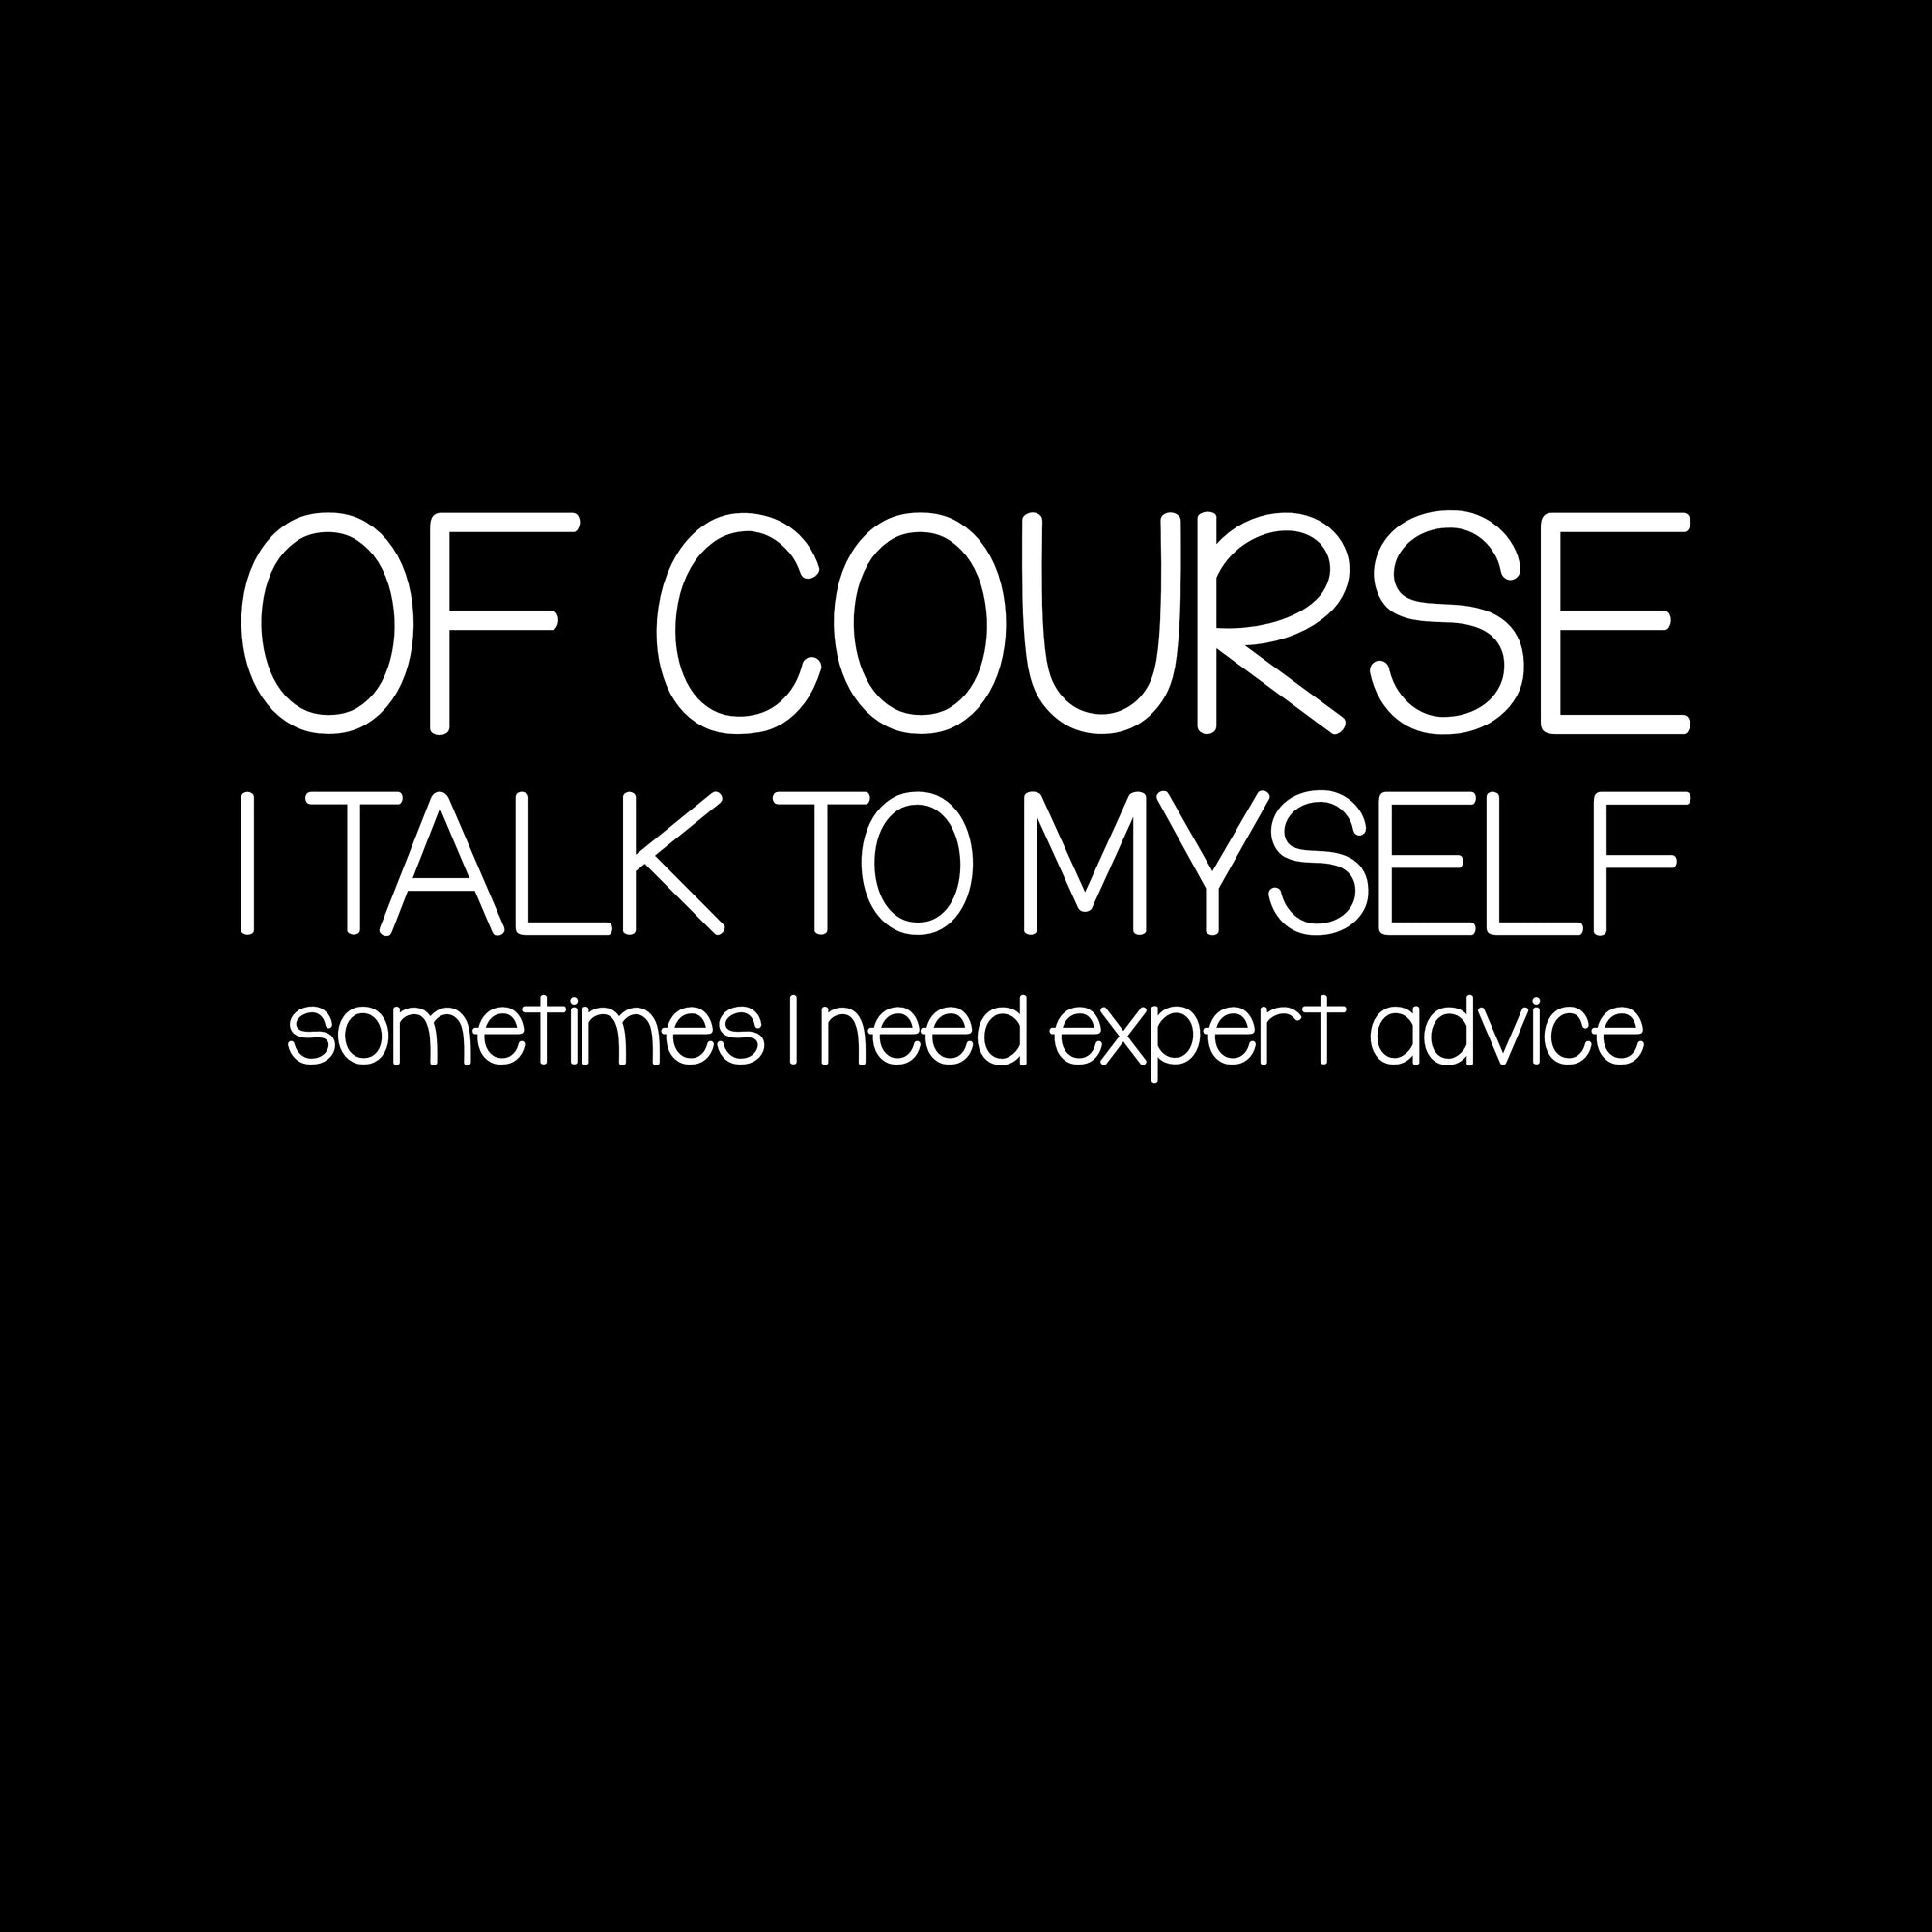 Of Course I Talk to Myself Printed T-Shirt-Black